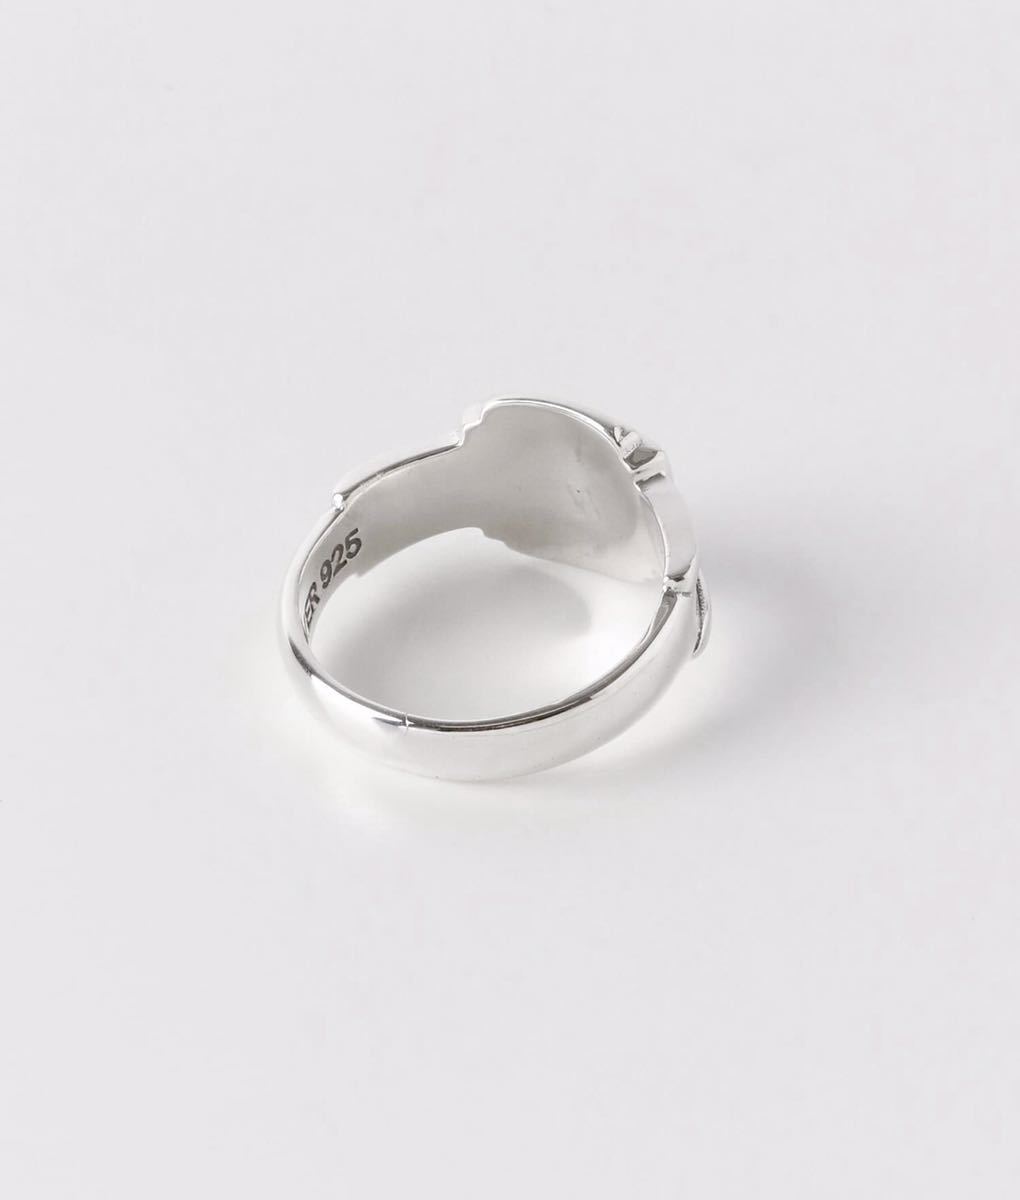  new goods *MAPLE FAMILY RING maple ring * silver 925neitib jewelry Indian ring 